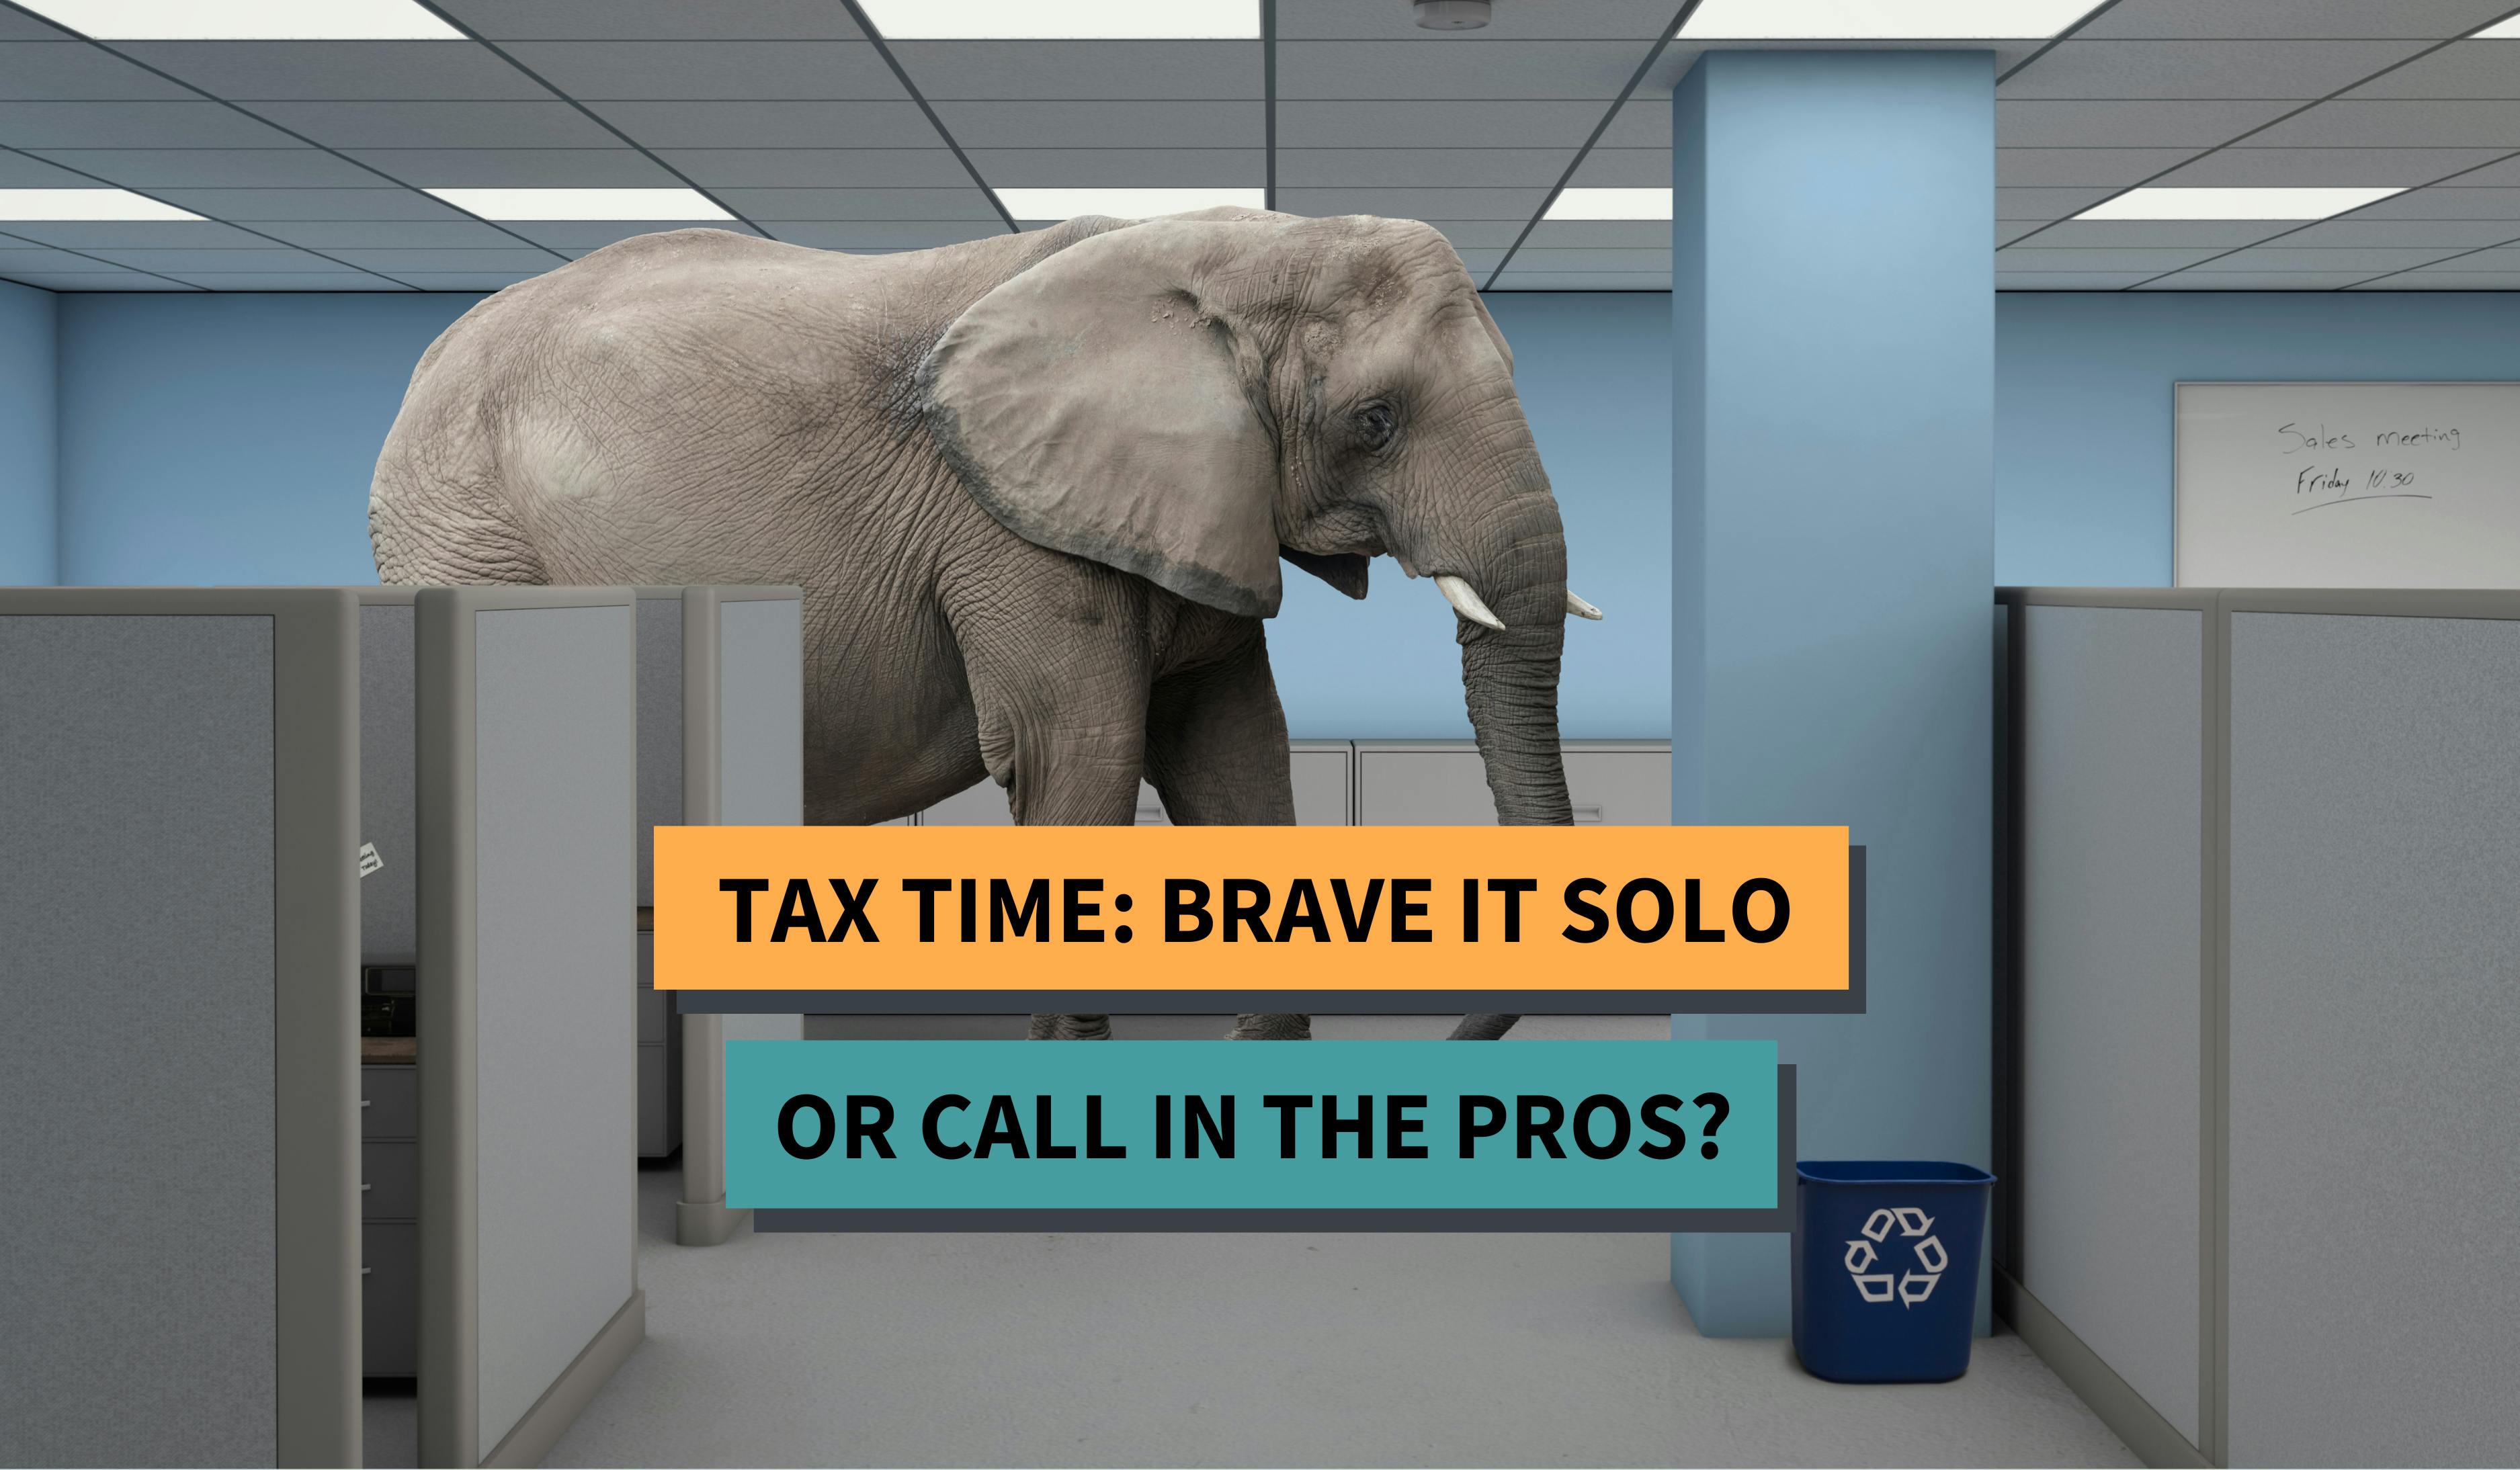 Tax time: brave it solo or call in the pros?